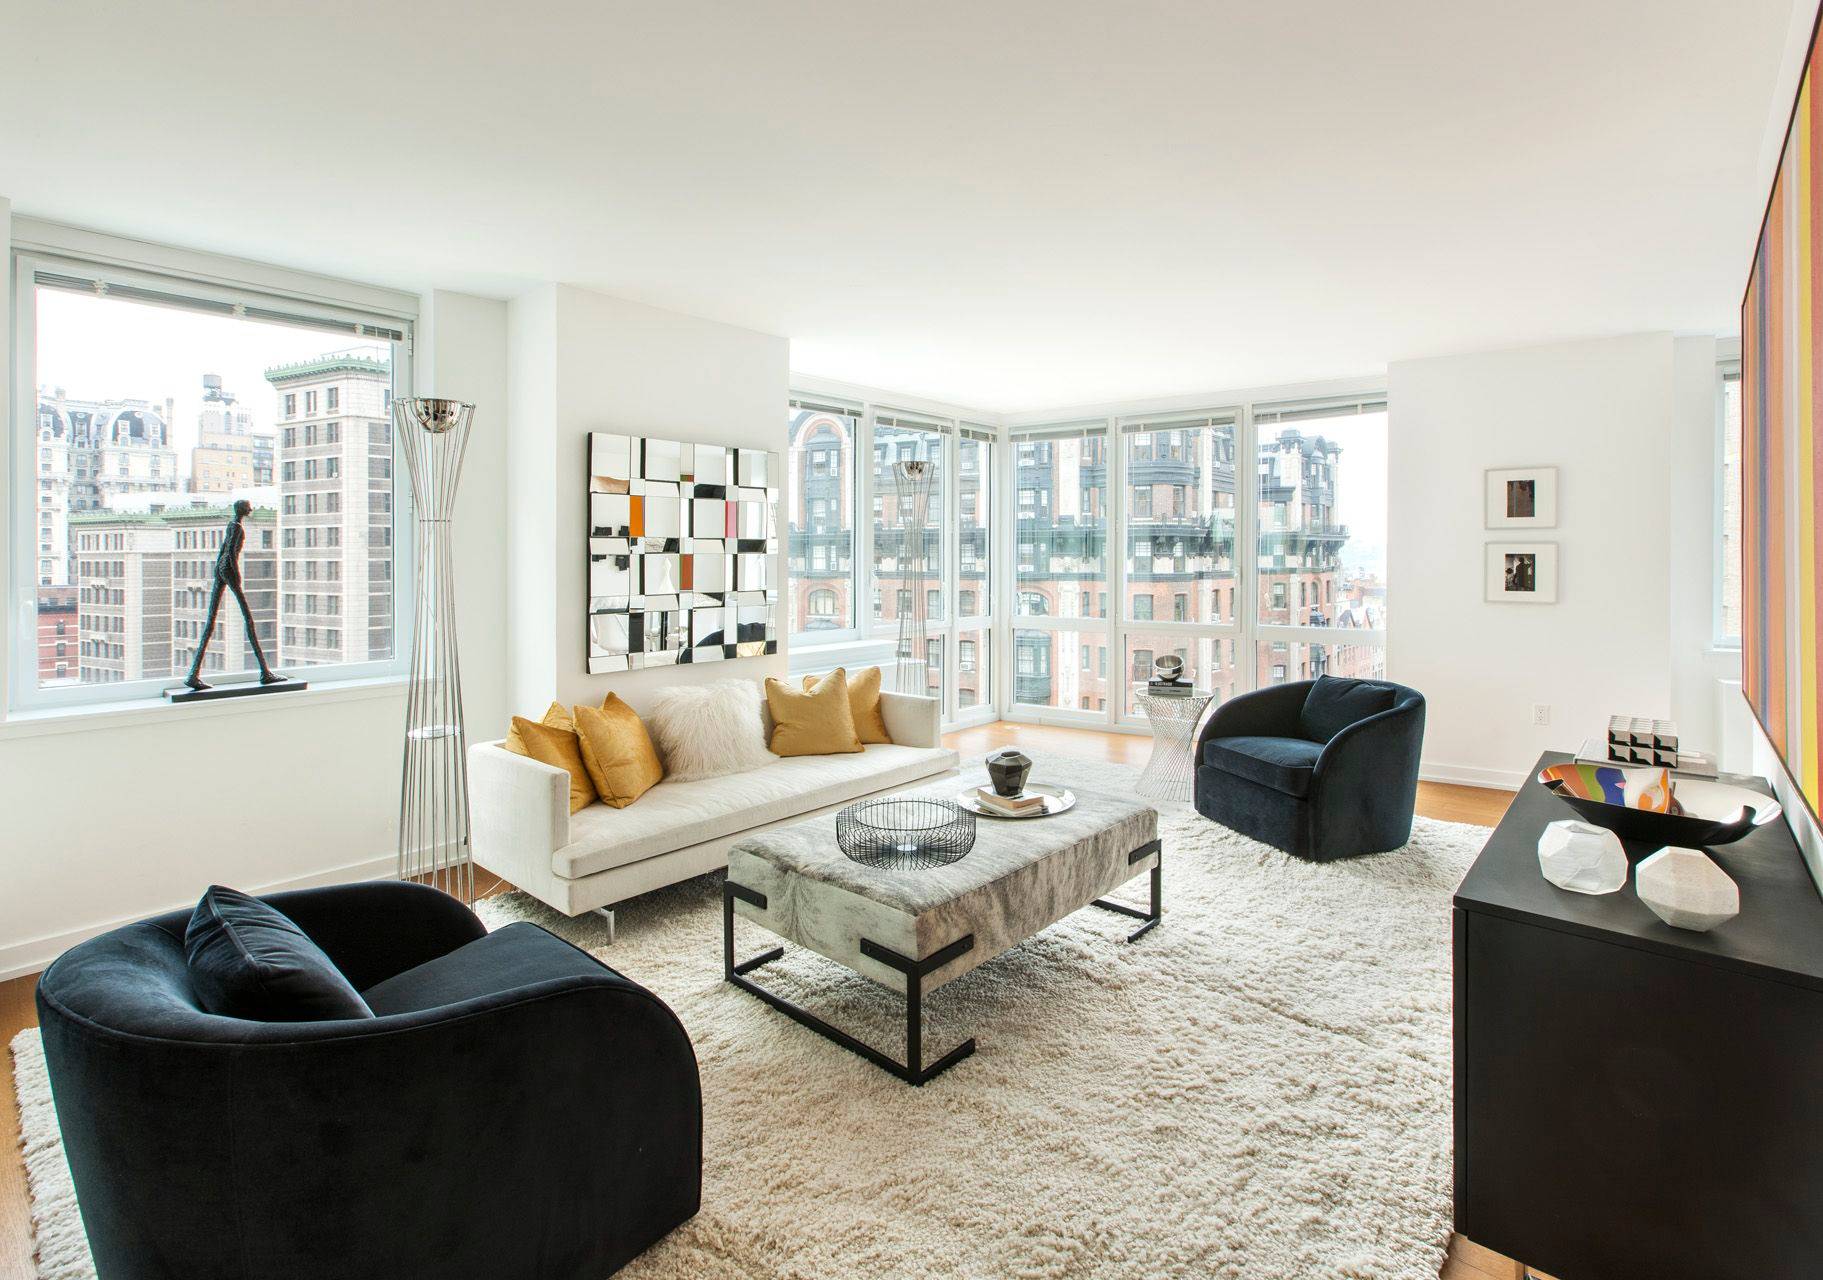 Located on the corner of 77th and Broadway, The Larstrand offers luxury living in the Upper West Side.